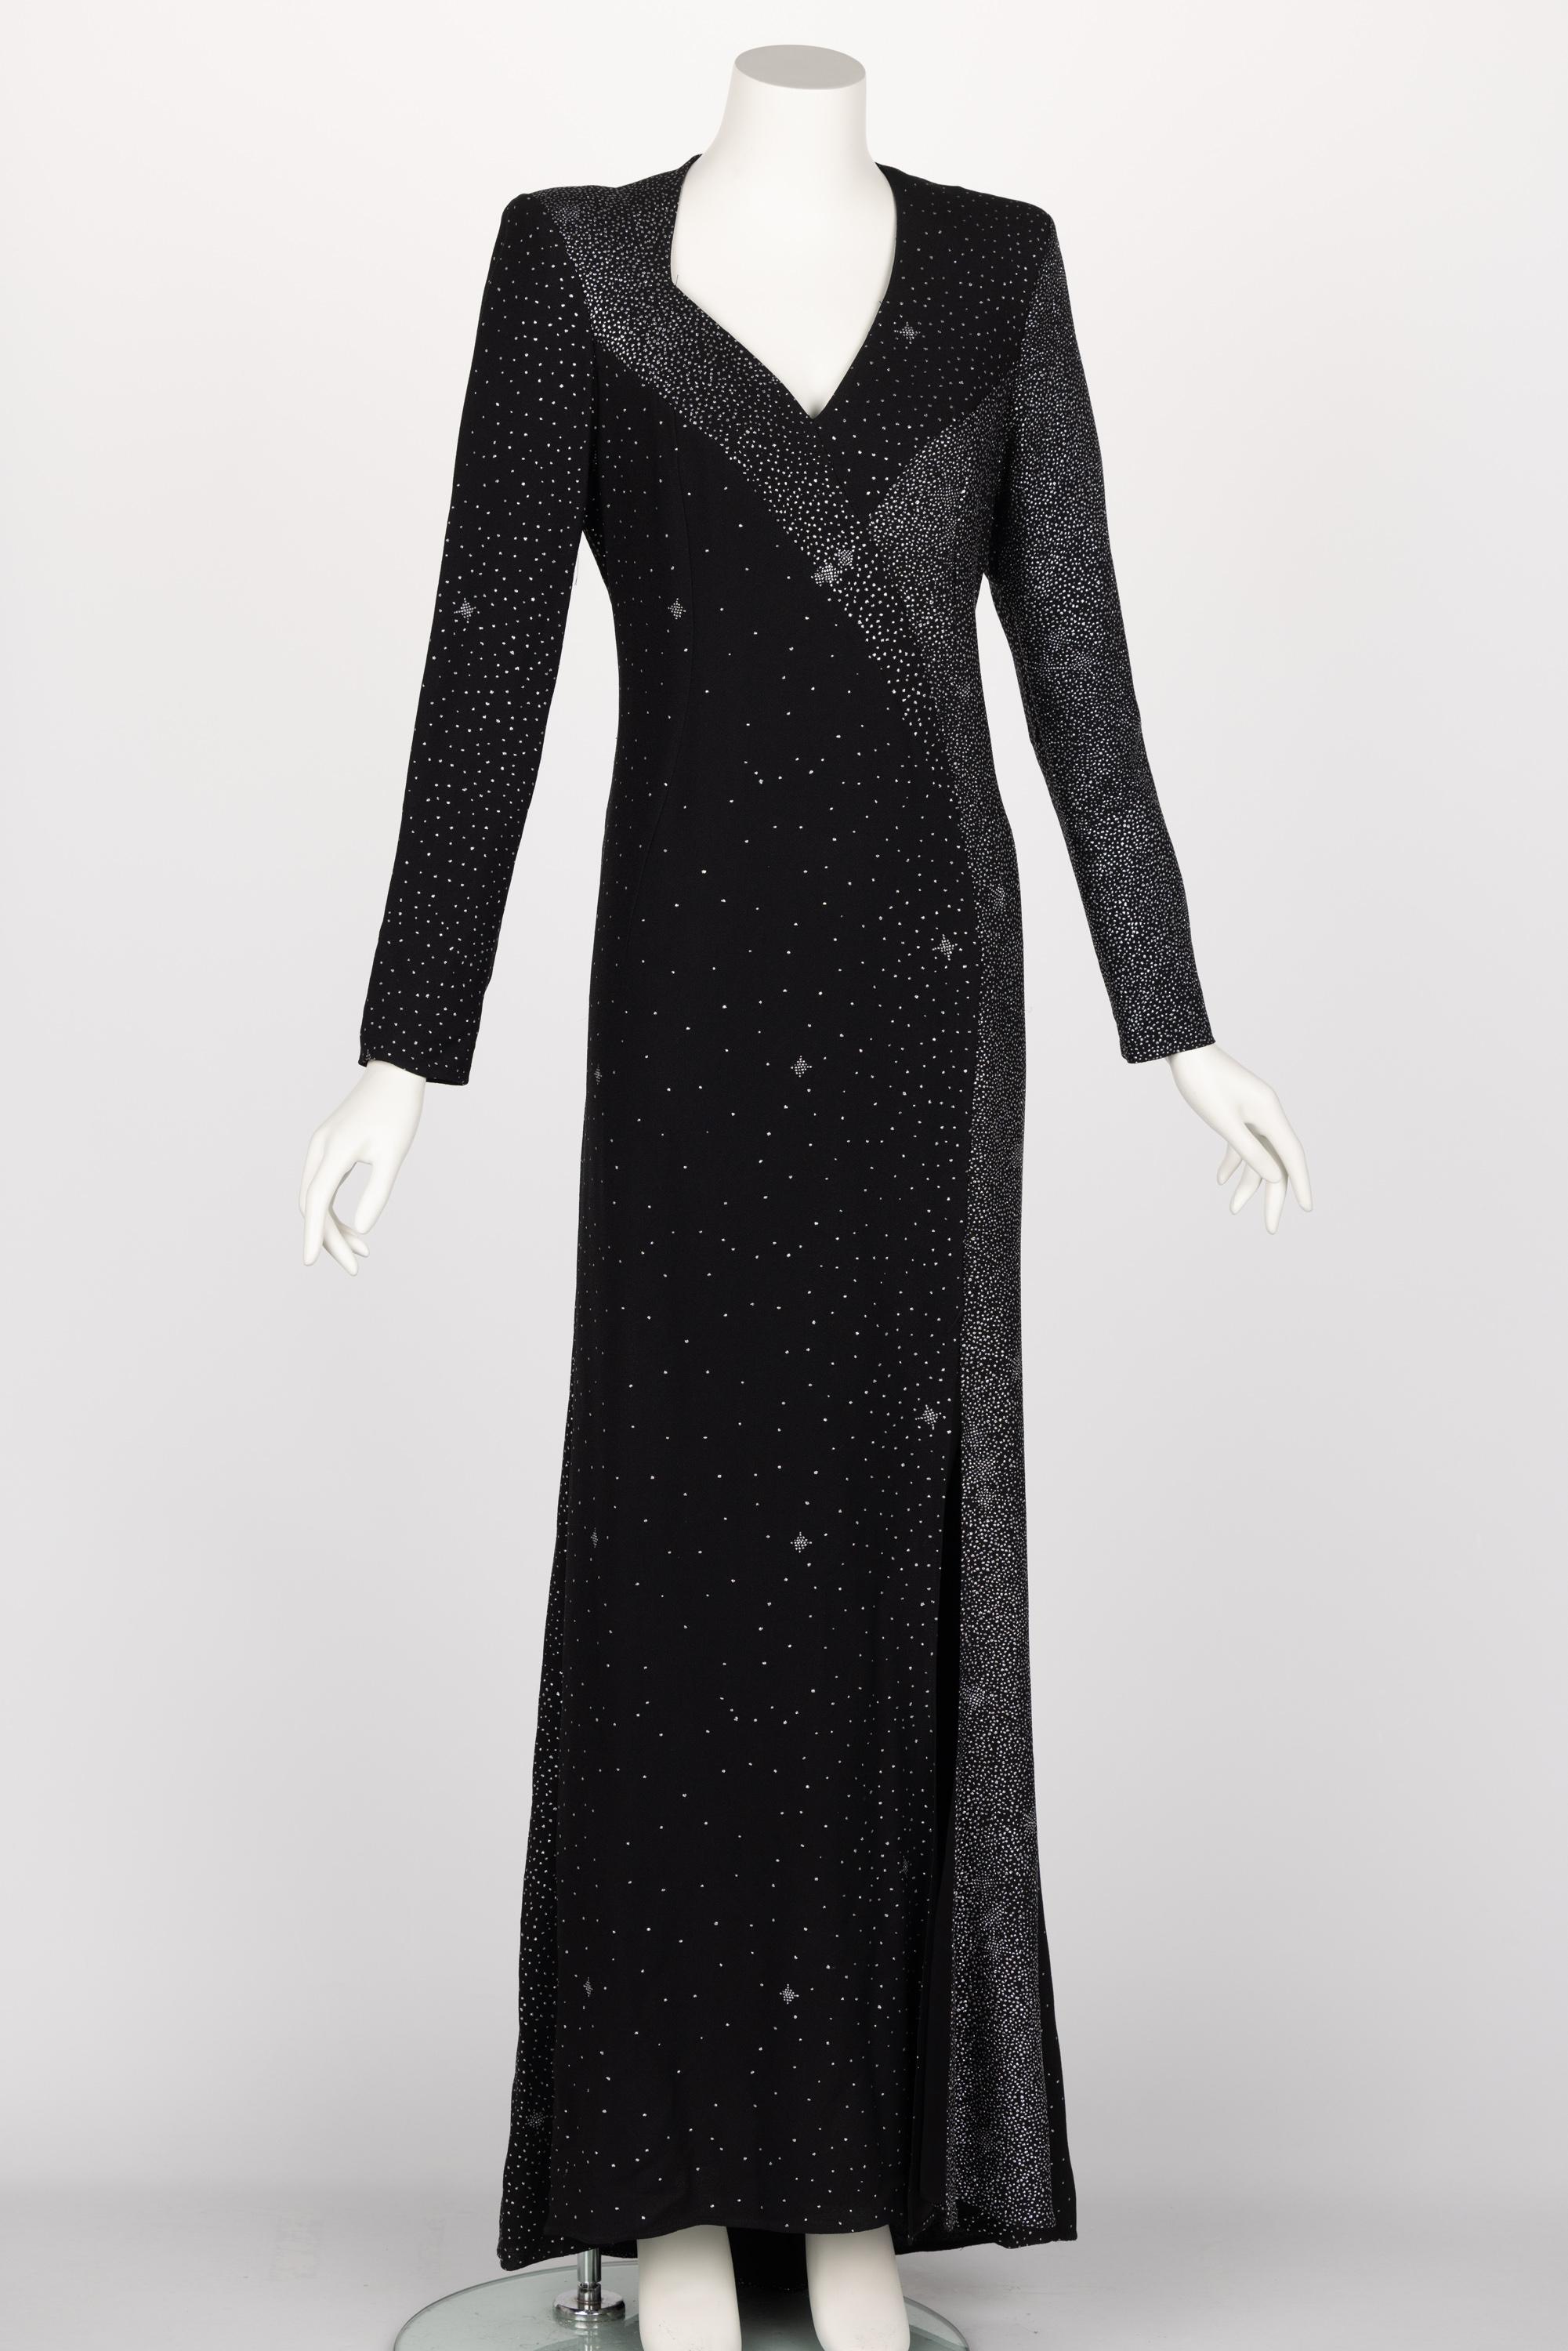 Christian Lacroix Midnight Sparkle Runway Gown FW 98/99 For Sale 2